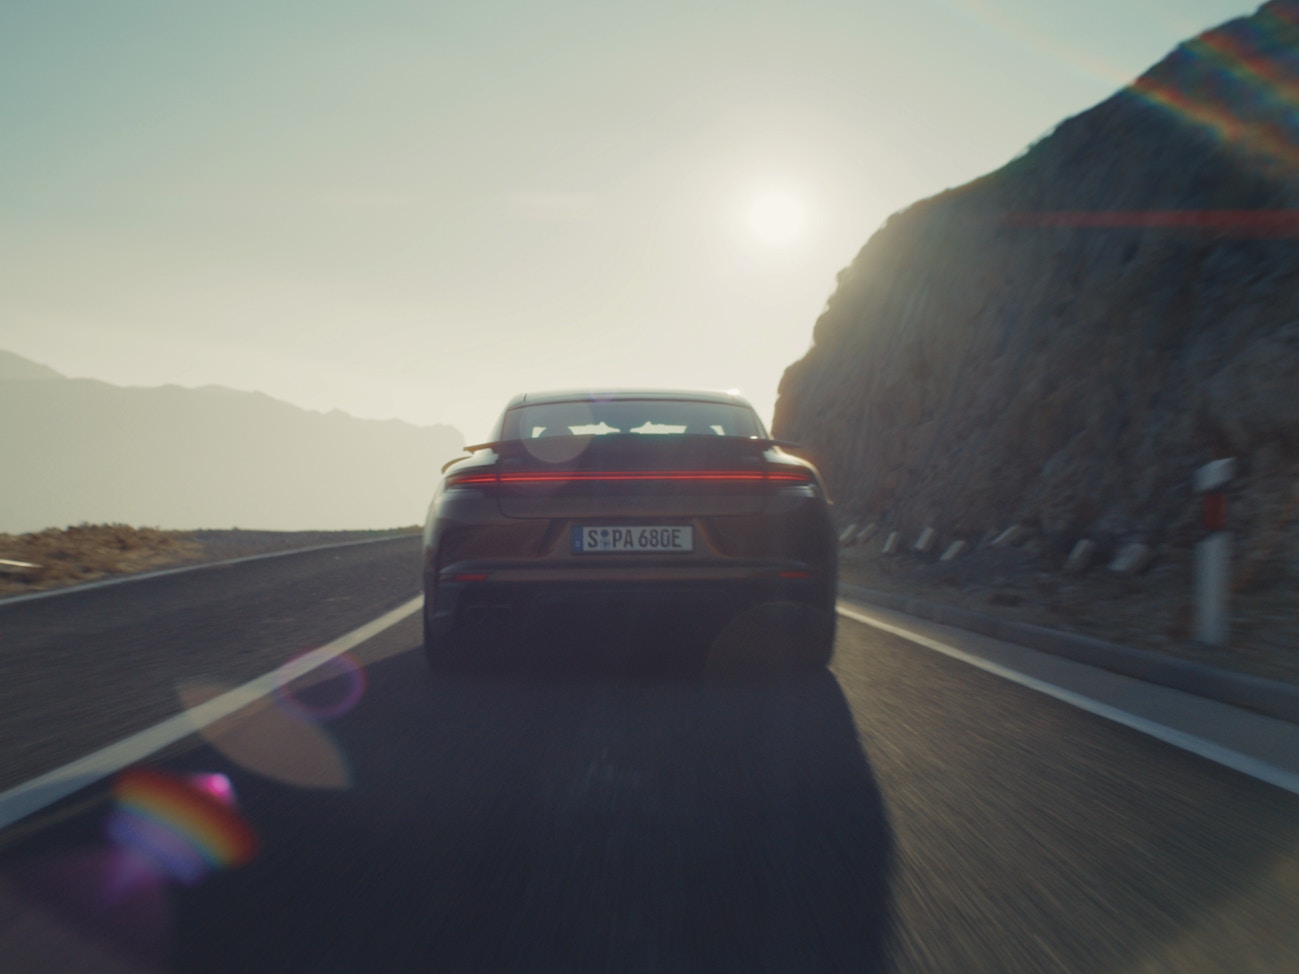 A 6-second moving image banner that shows the new Panamera Turbo E-Hybrid in its entirety as well as a few details through steady camera movements.